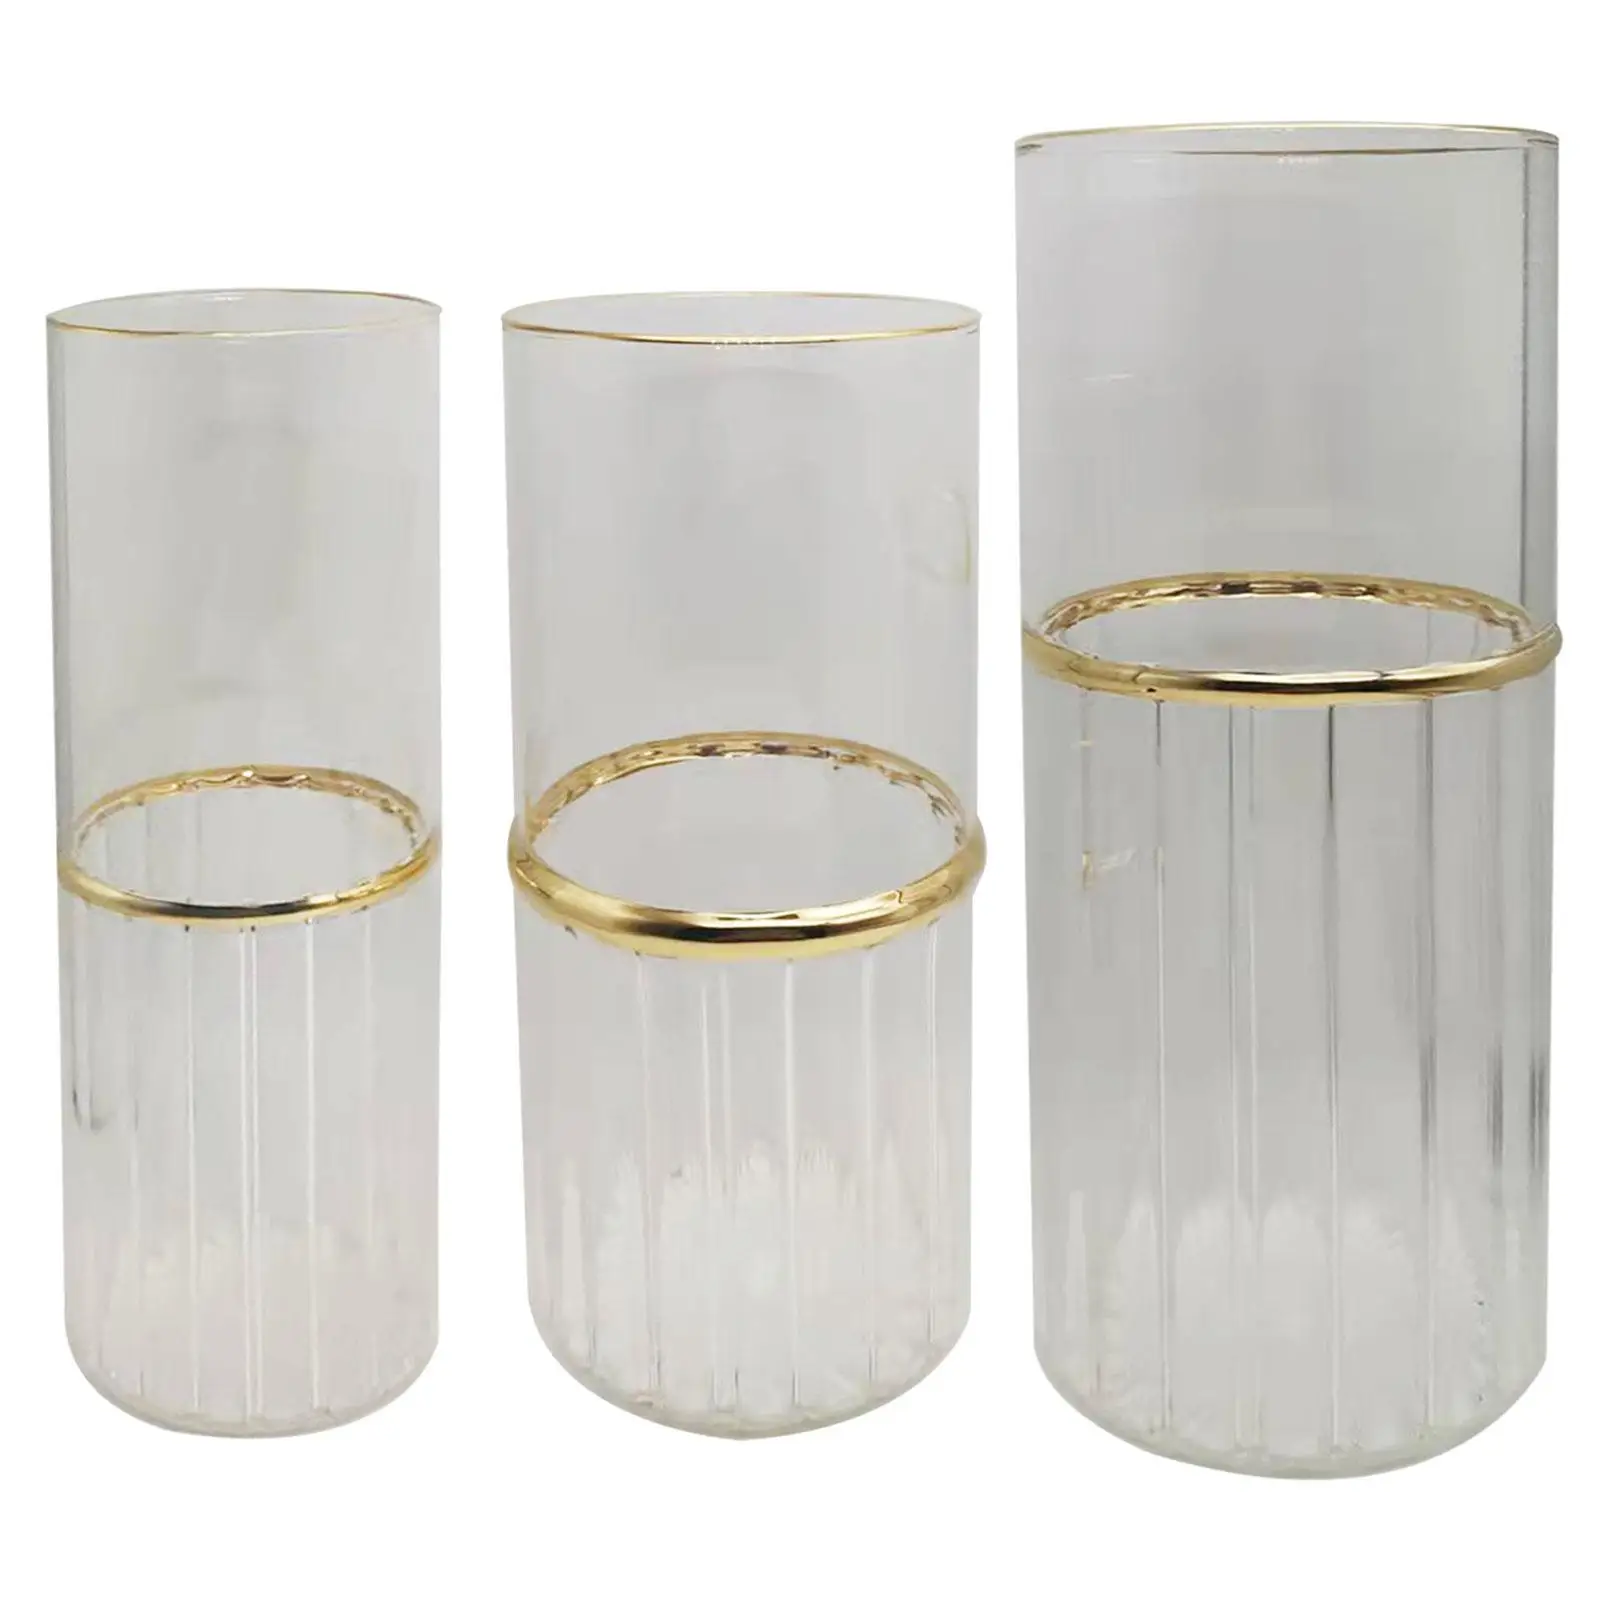 Clear Cylinder Glass Flower Vase Bottle Exquisite Sturdy Thickened Hand Blow for Centerpieces Decor Multipurpose